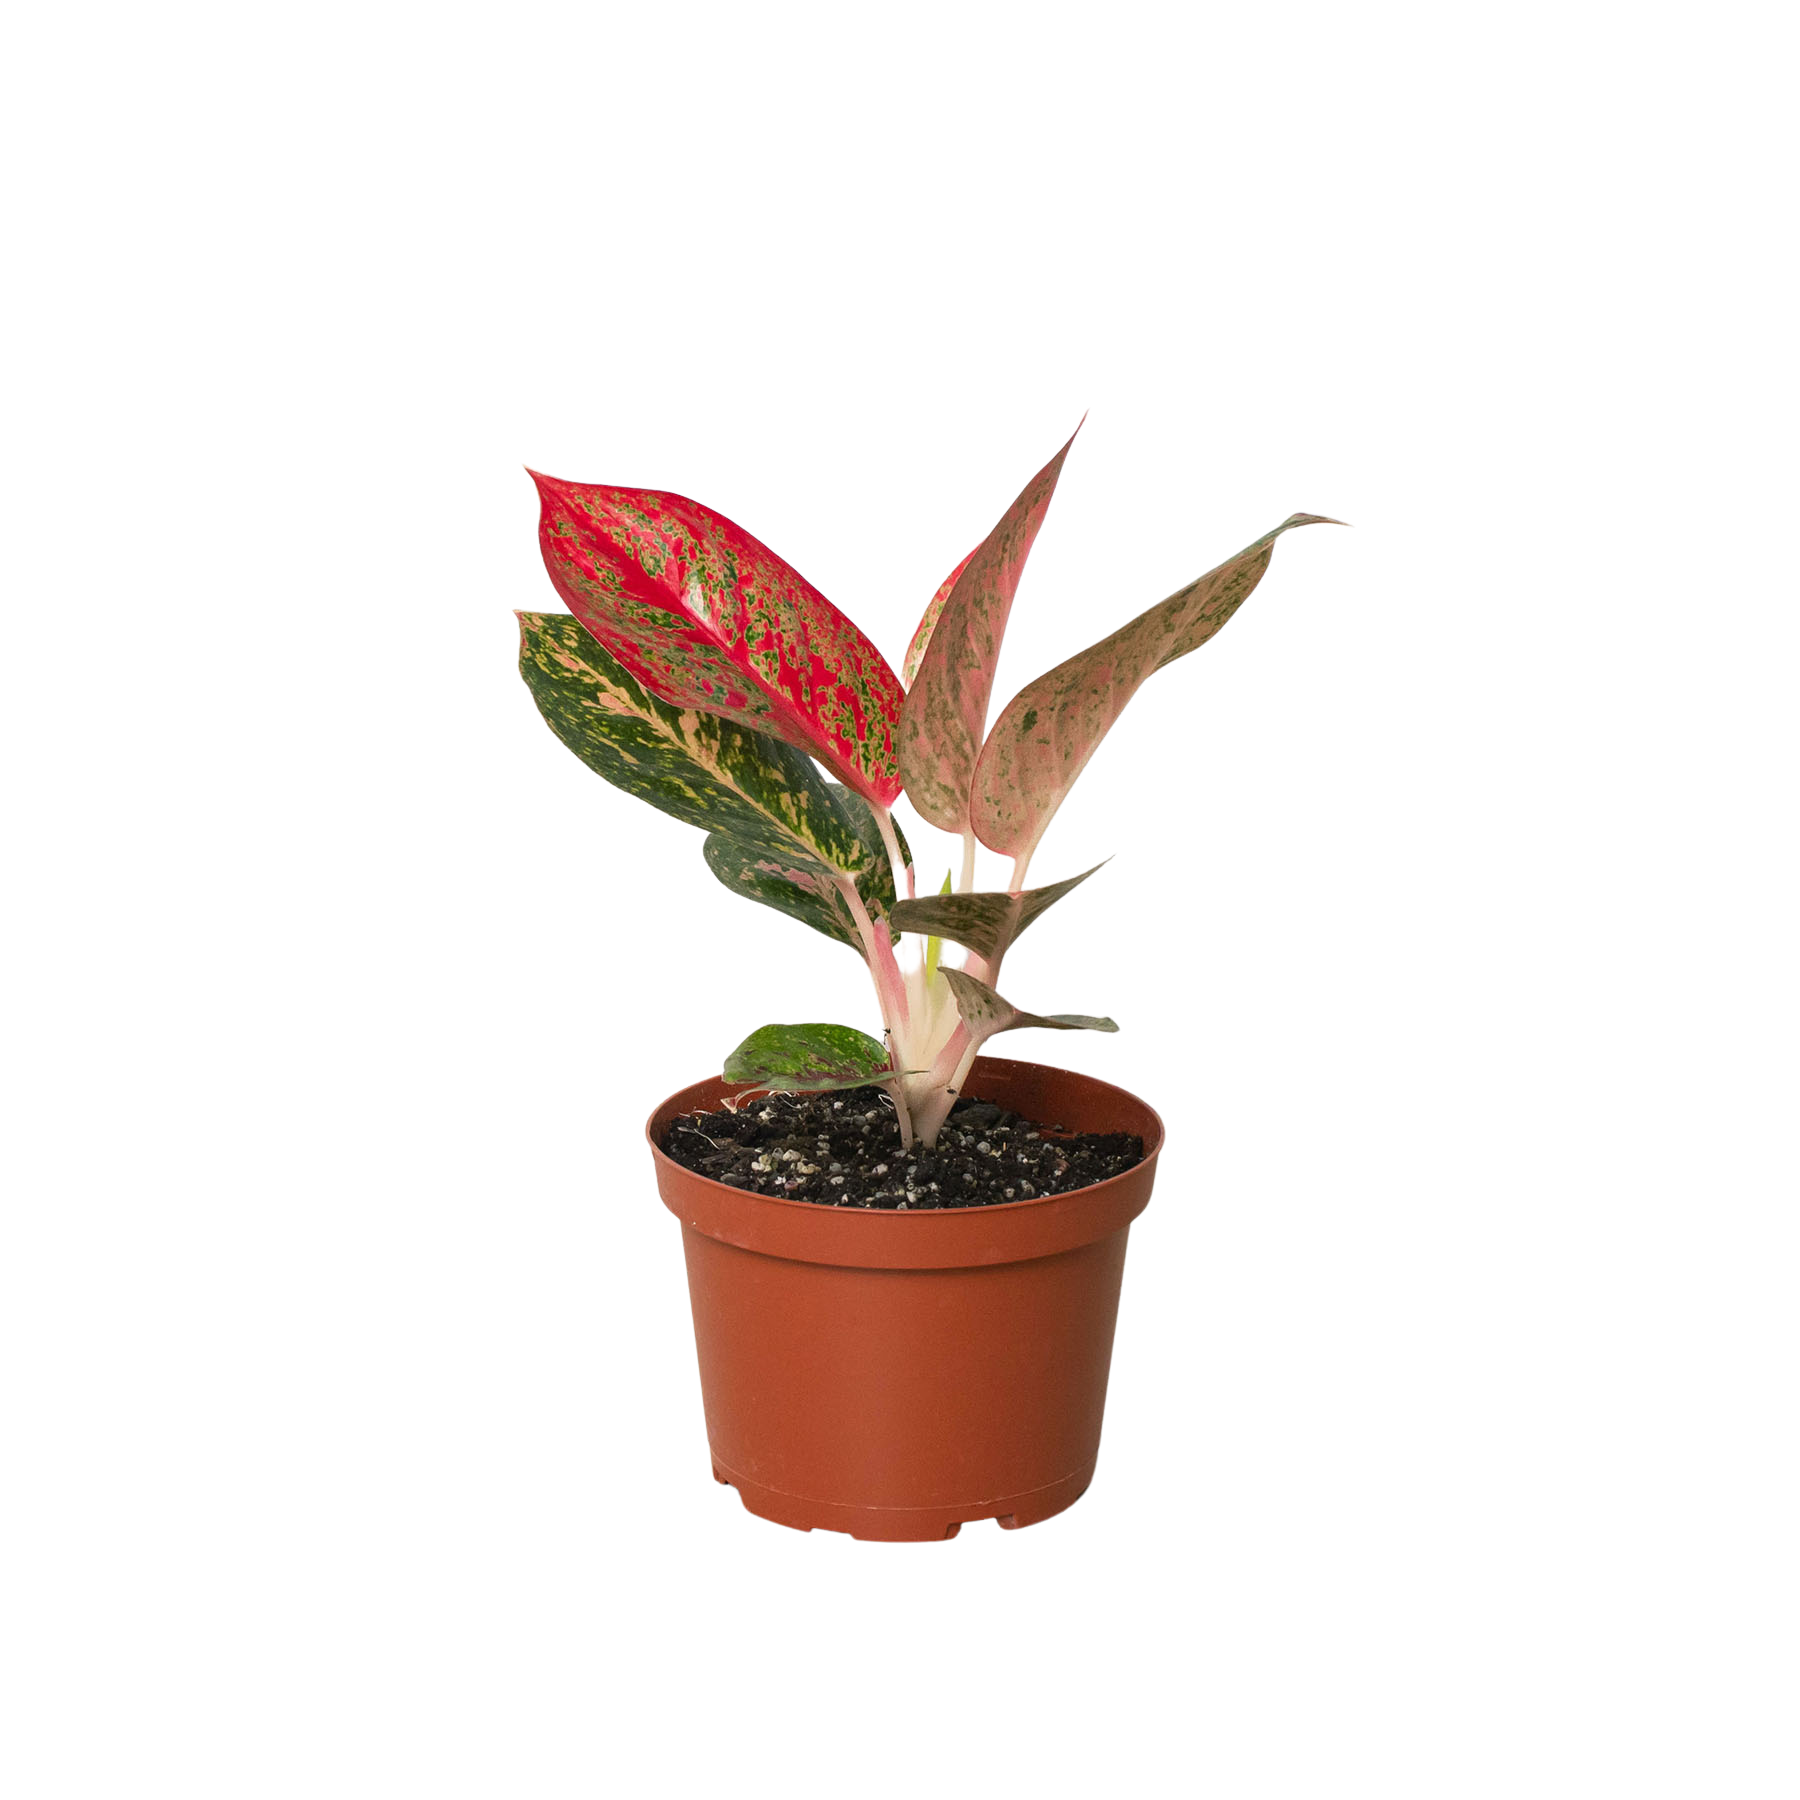 A small potted plant with vibrant red and green leaves, available at the best garden center near me.